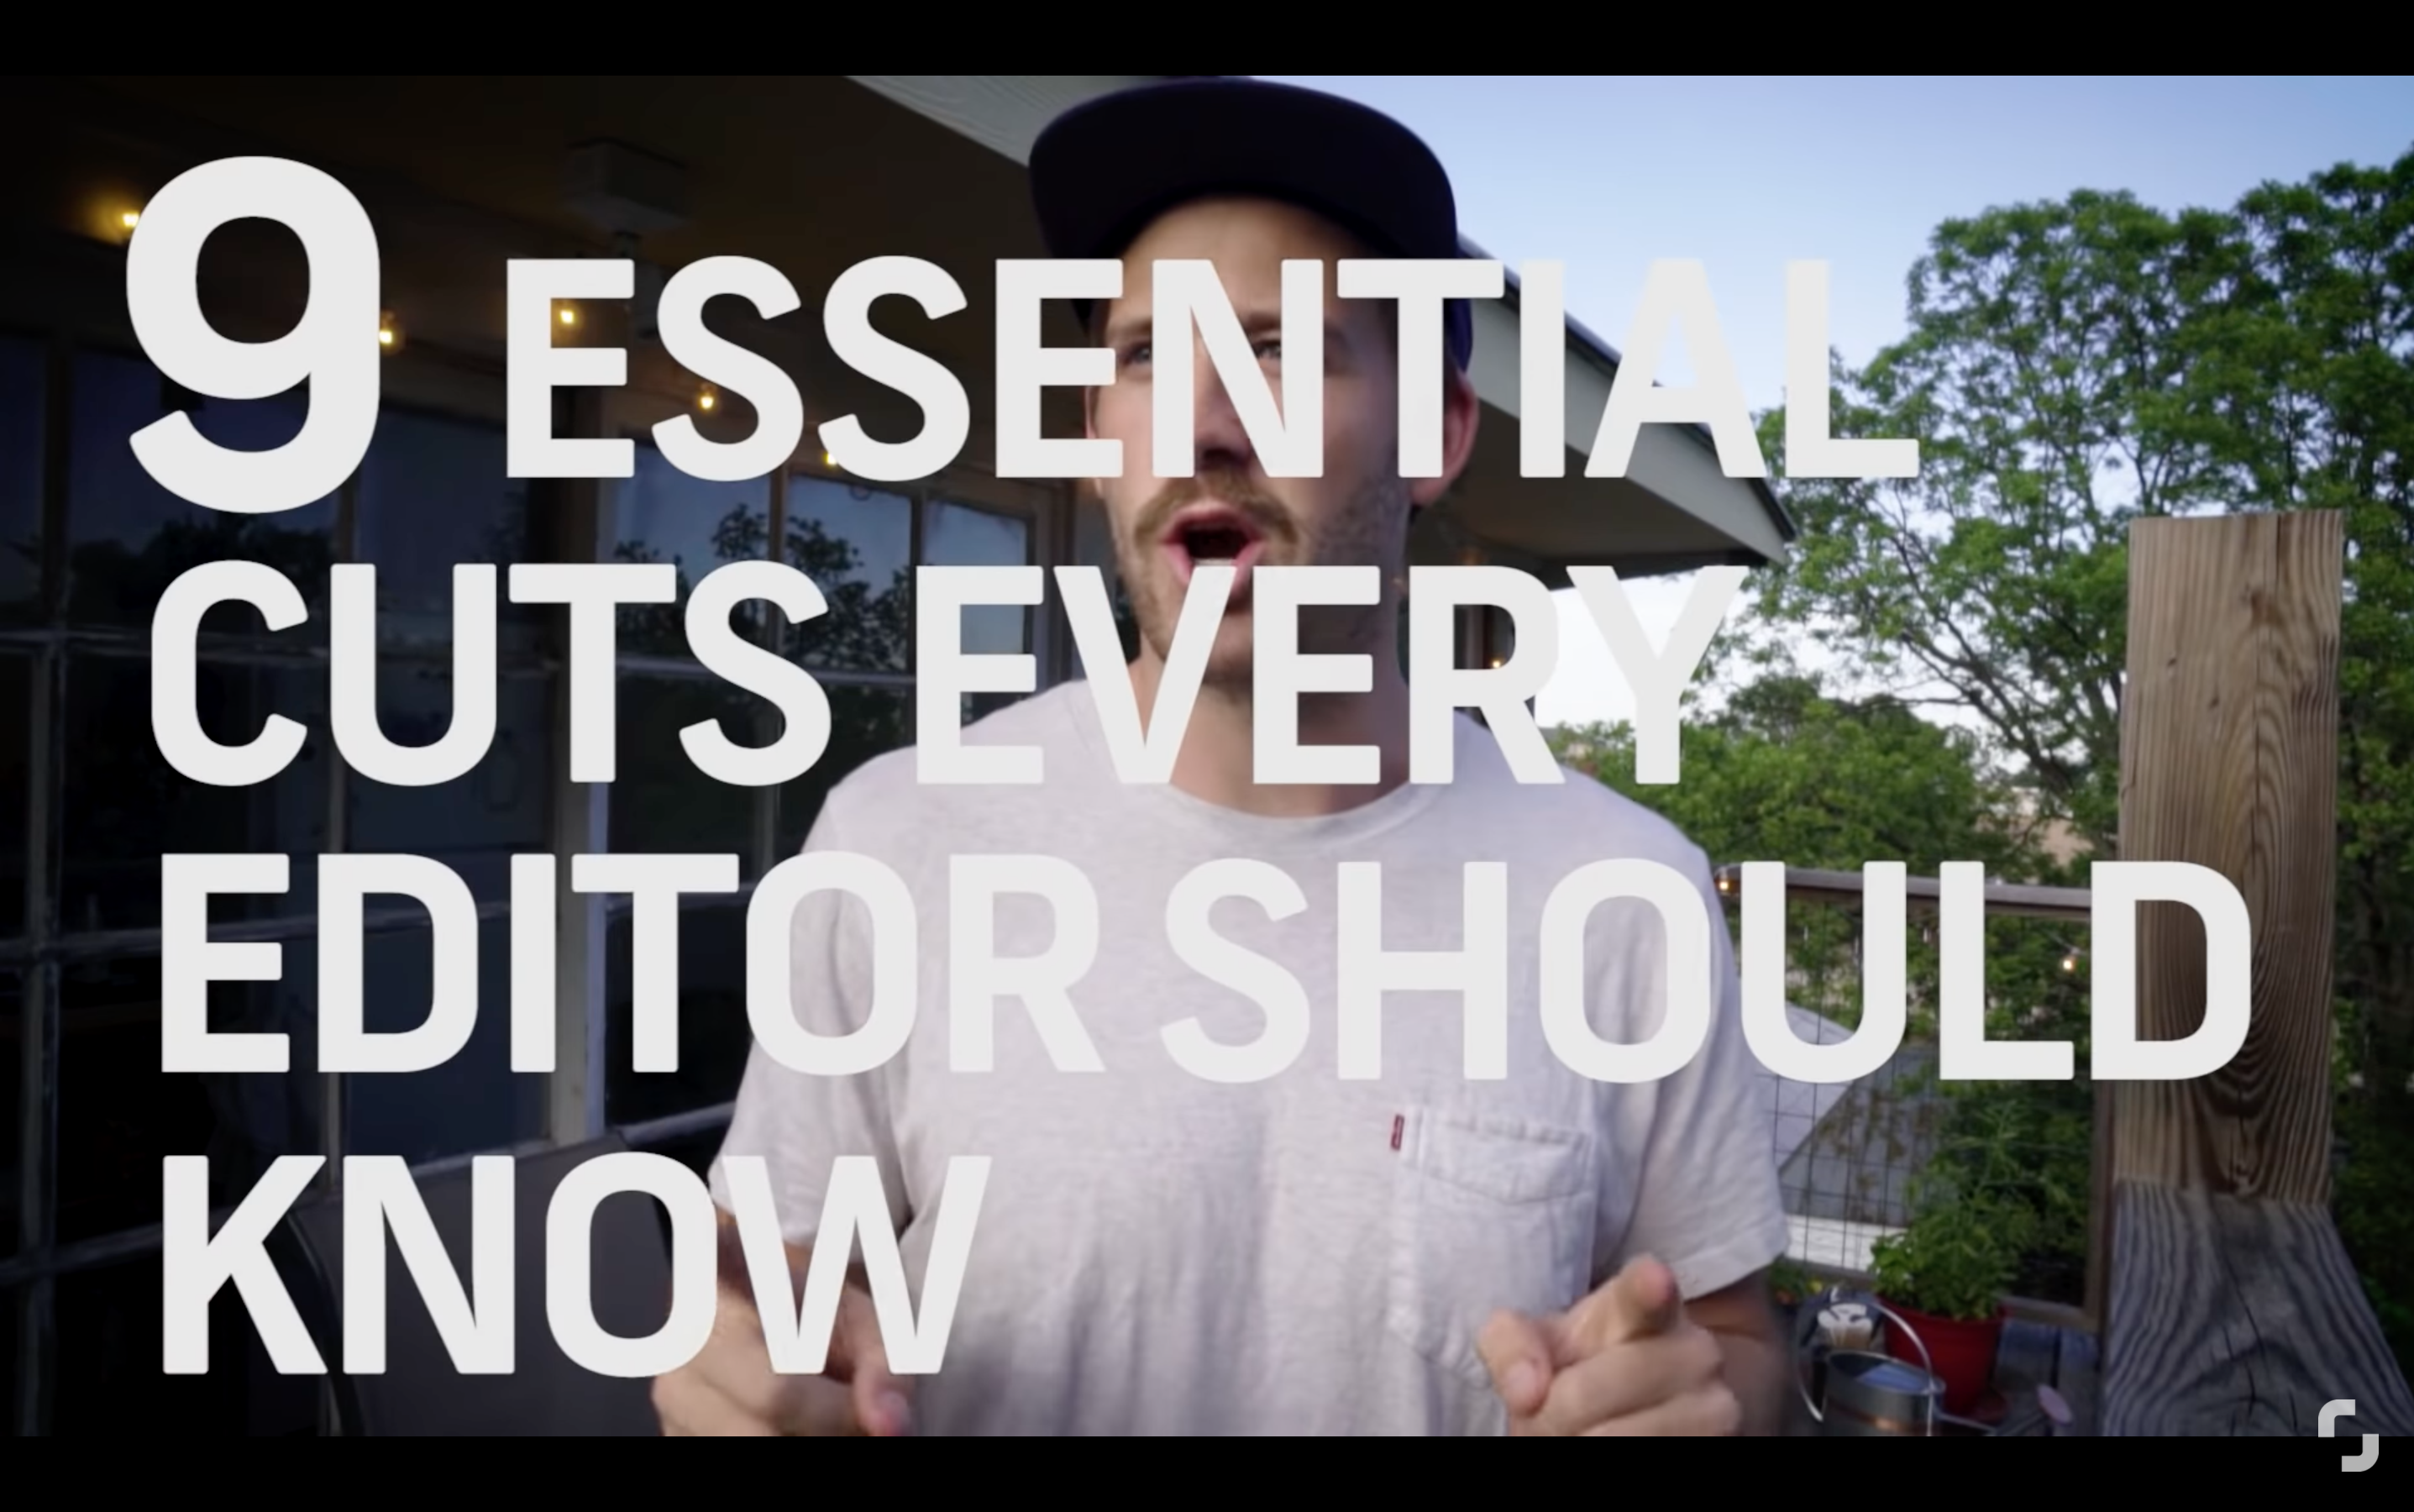 9 essential cuts every editor should know